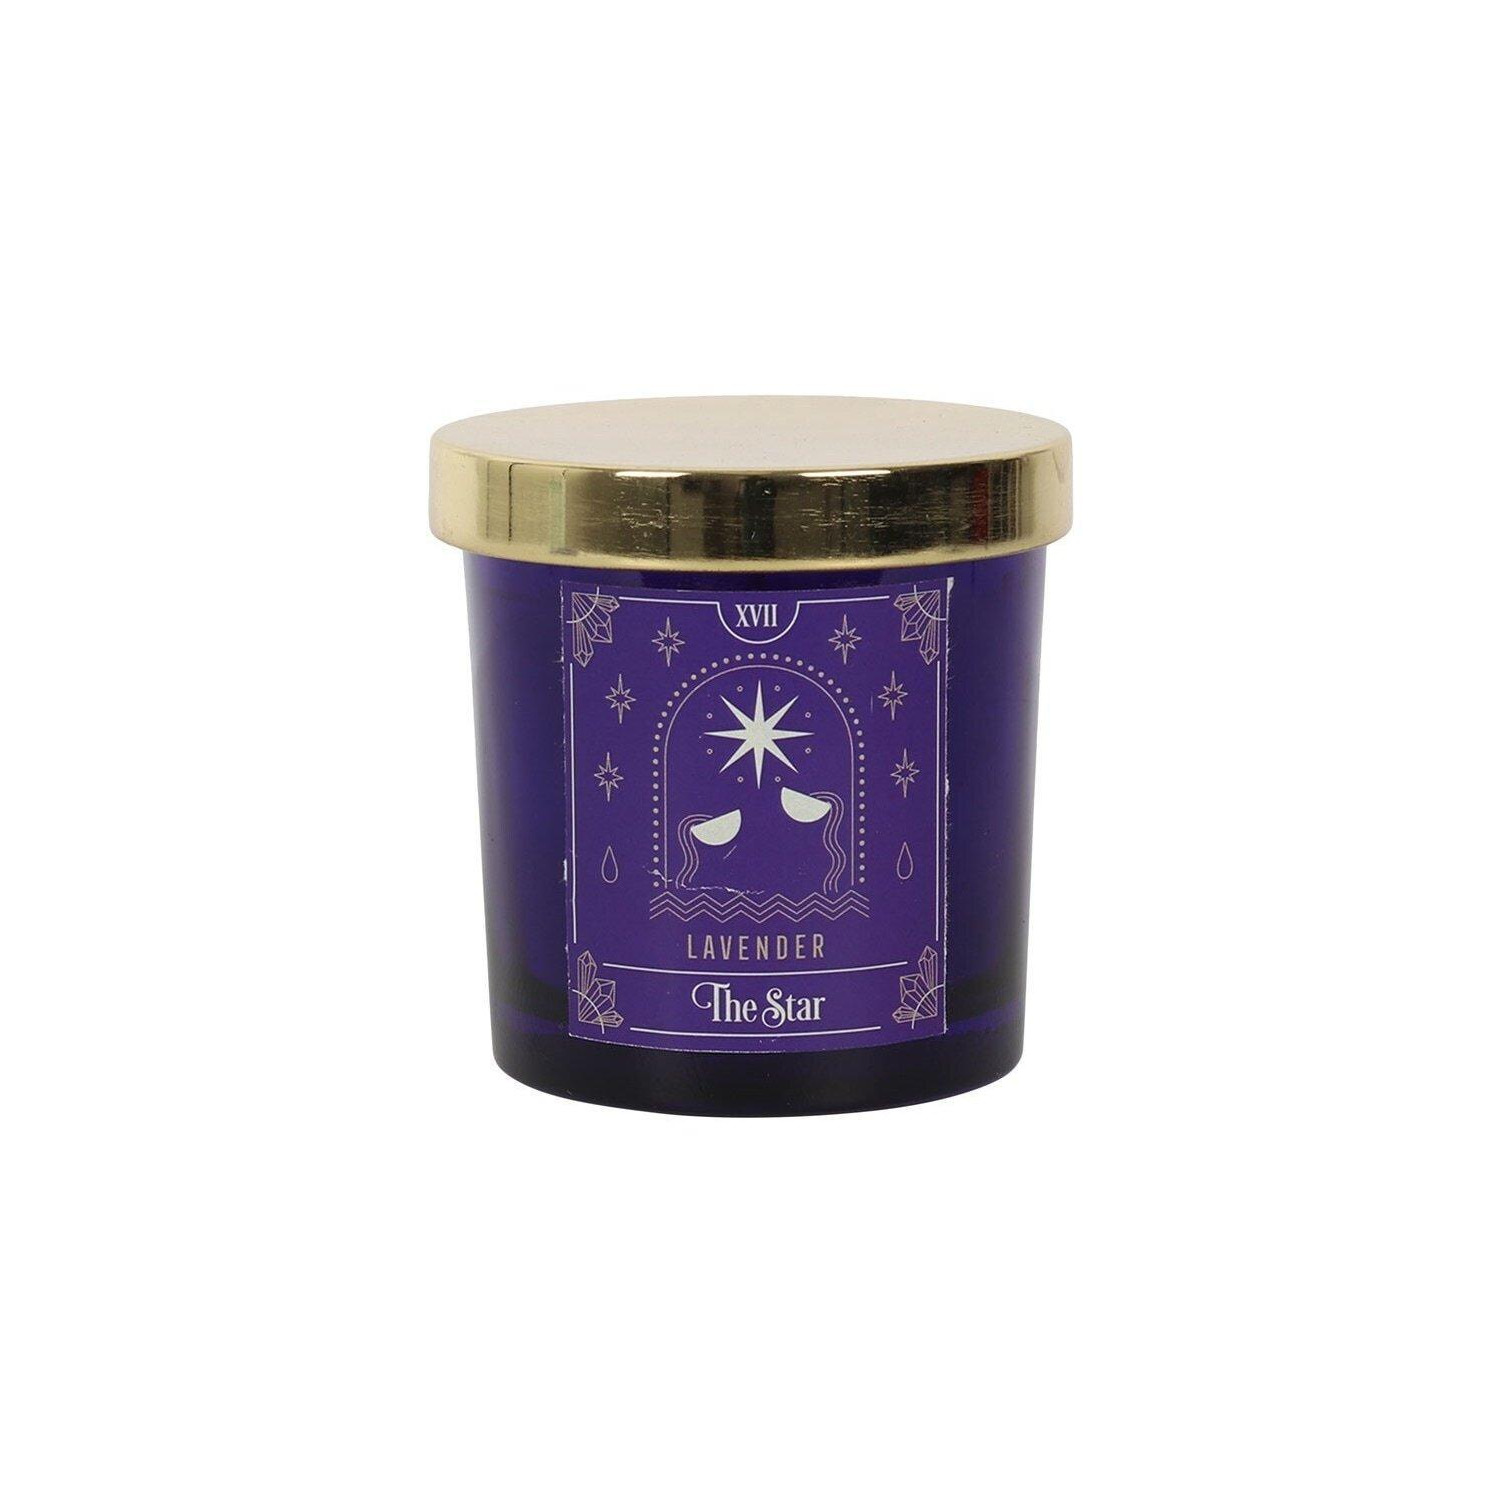 Lavender The Star Scented Candle - image 1